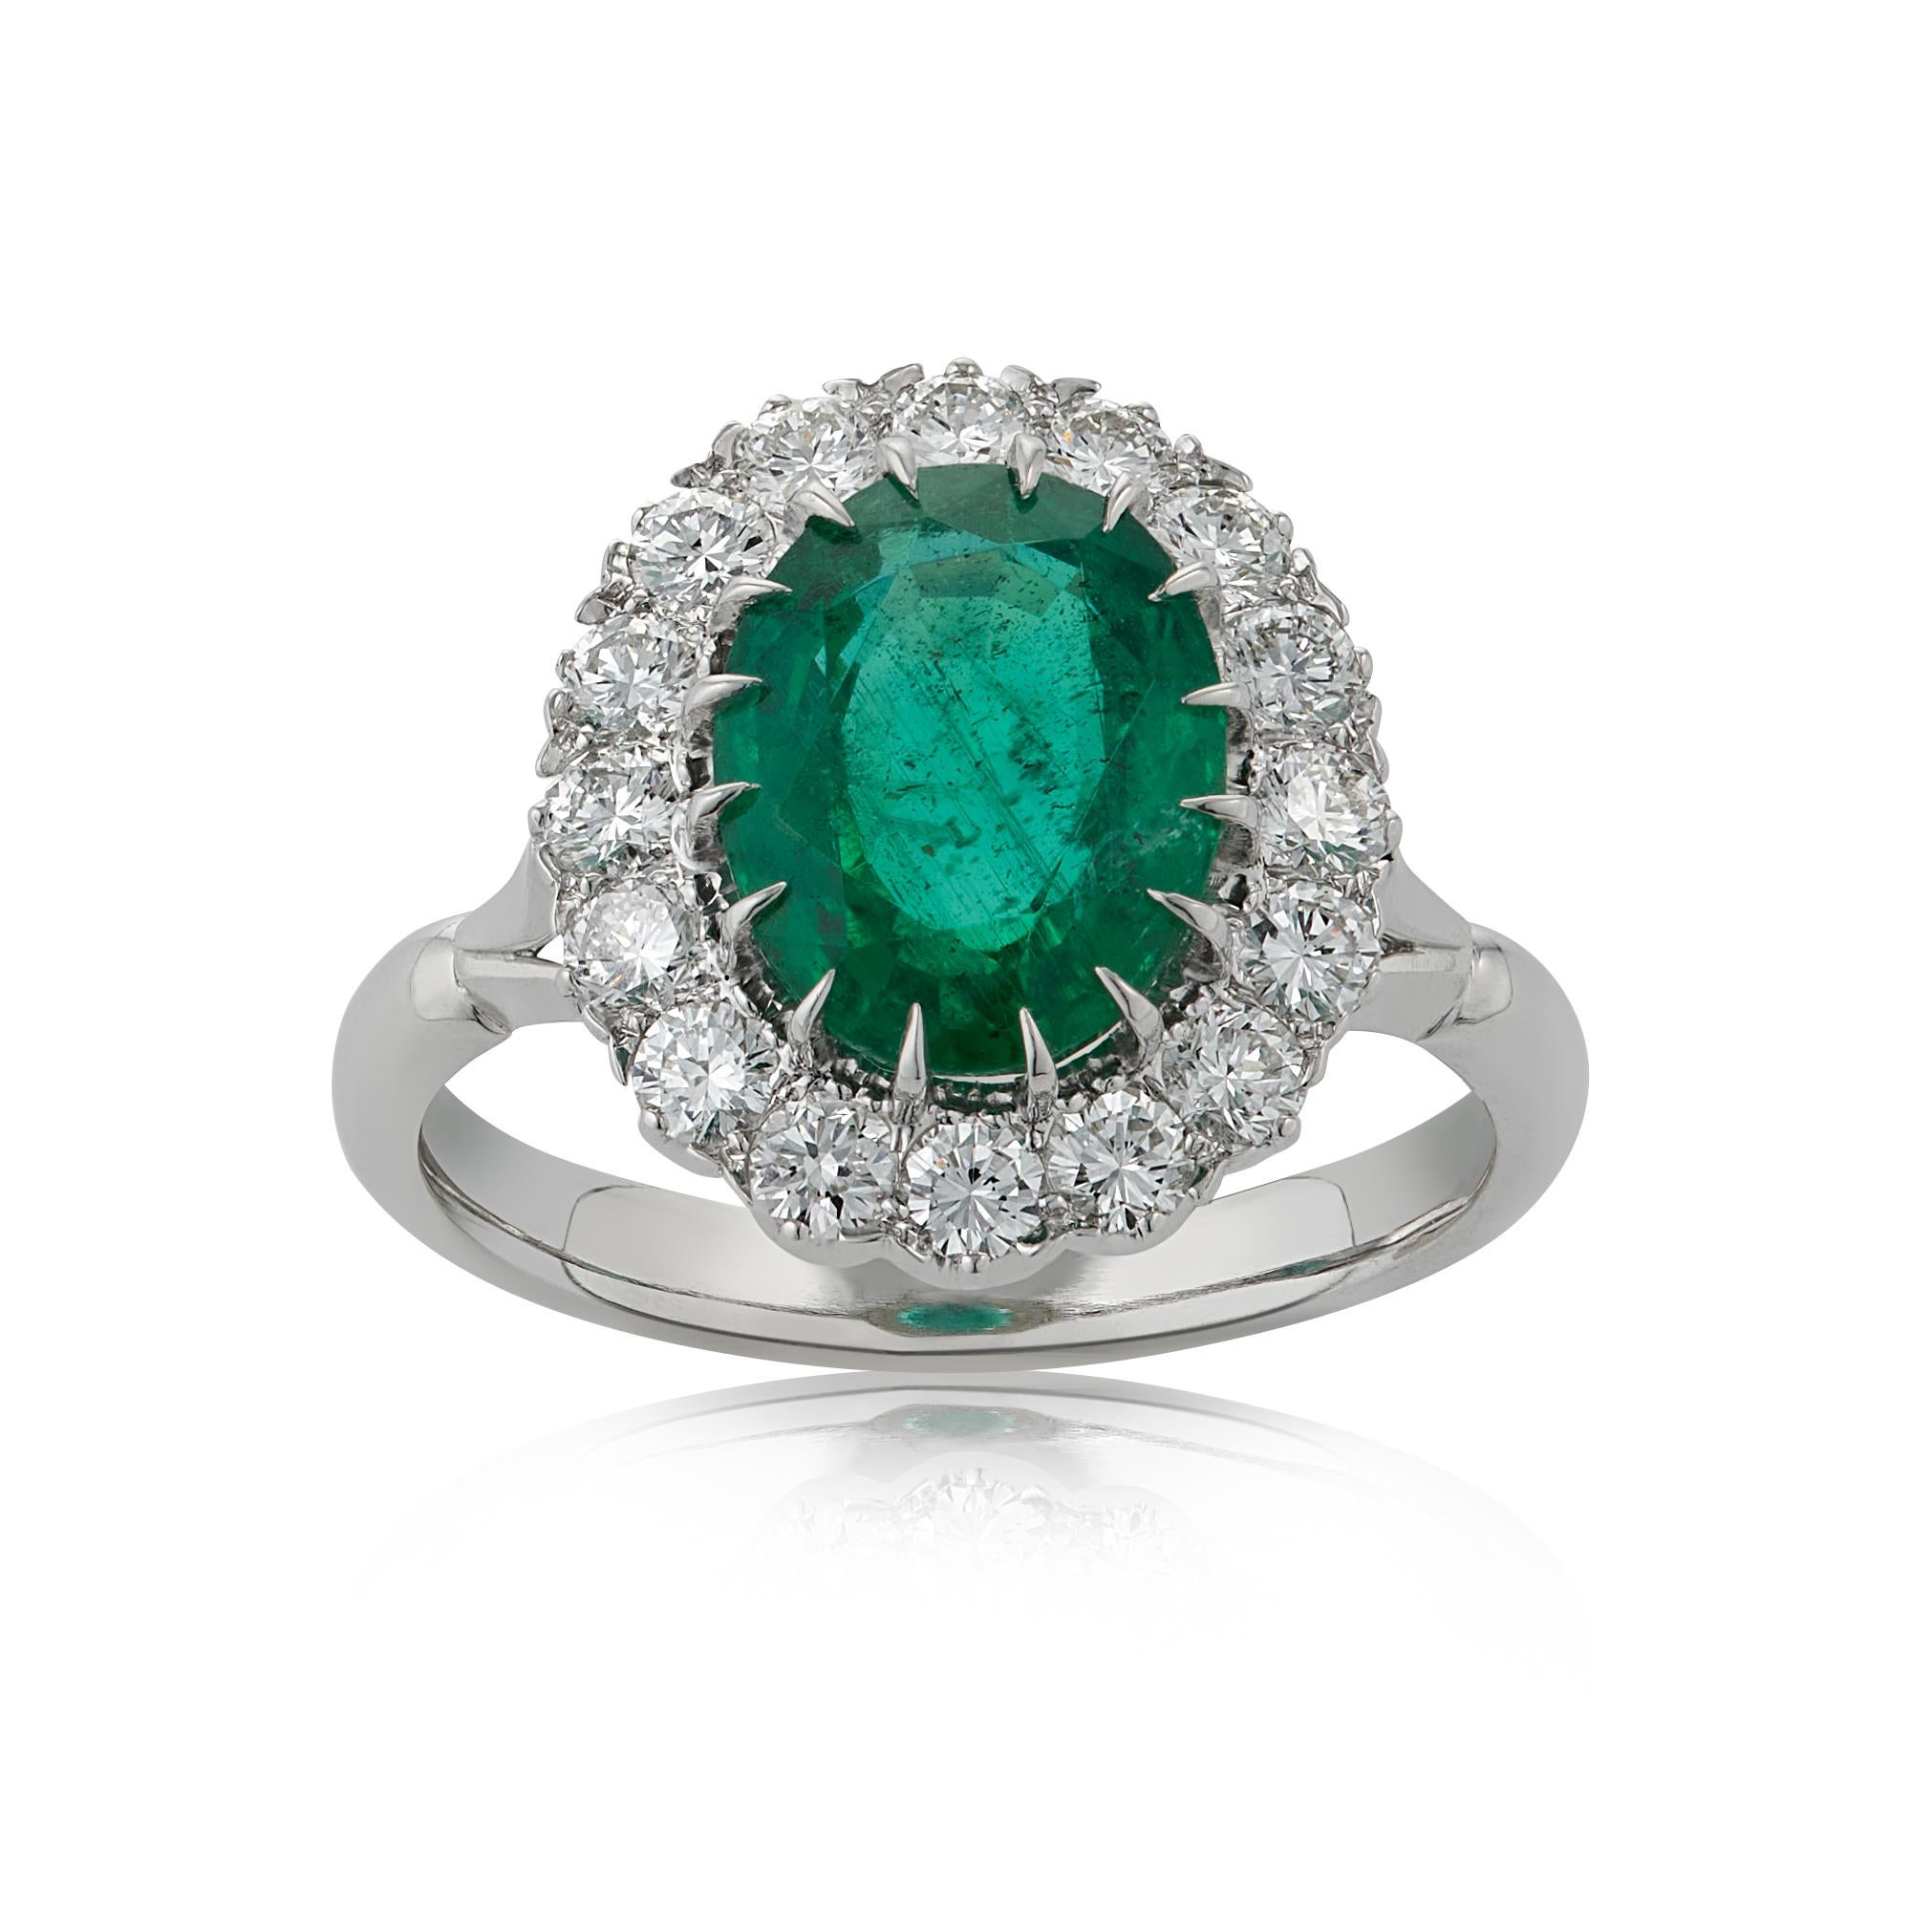 E Wolfe & Company Handmade 2.82 carat Emerald and Diamond Platinum Cluster Ring. The oval-cut emerald centre stone weighs 2.82 carats and is surrounded by 16 round brilliant diamonds which collectively weigh .77 carats. The diamonds are of G colour